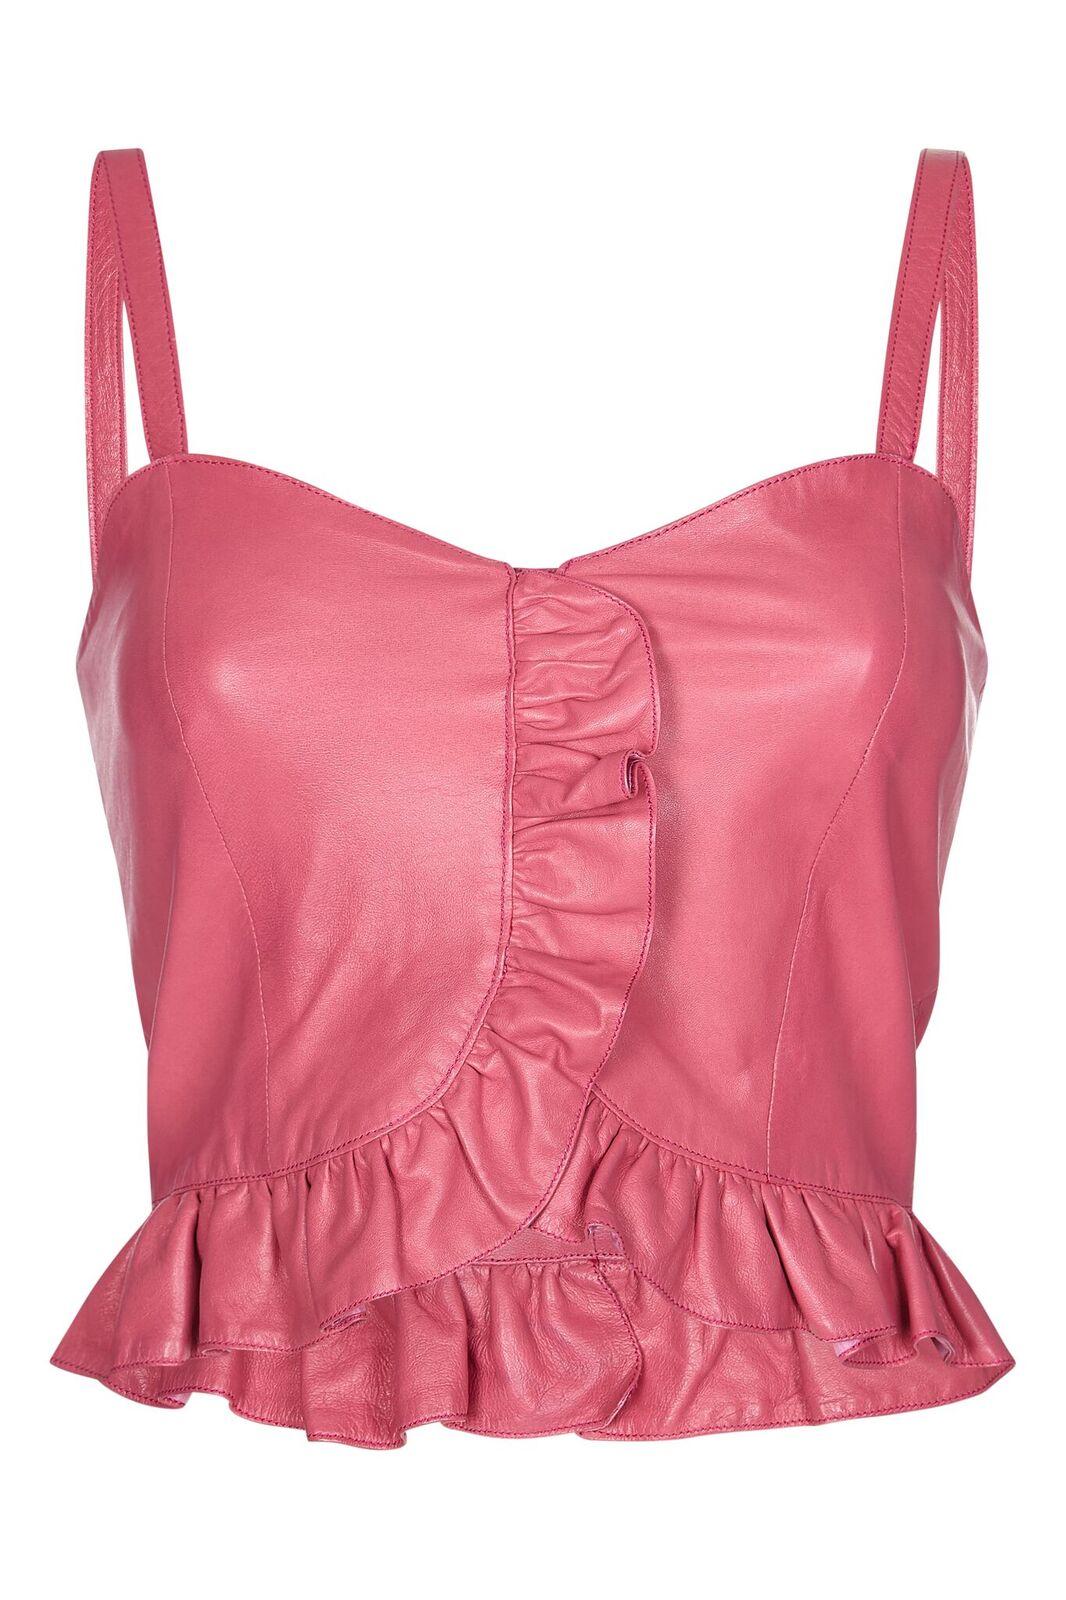 Vintage 1980s Soft Pink Leather 3 Piece Set With Ruffled Bralet Damen